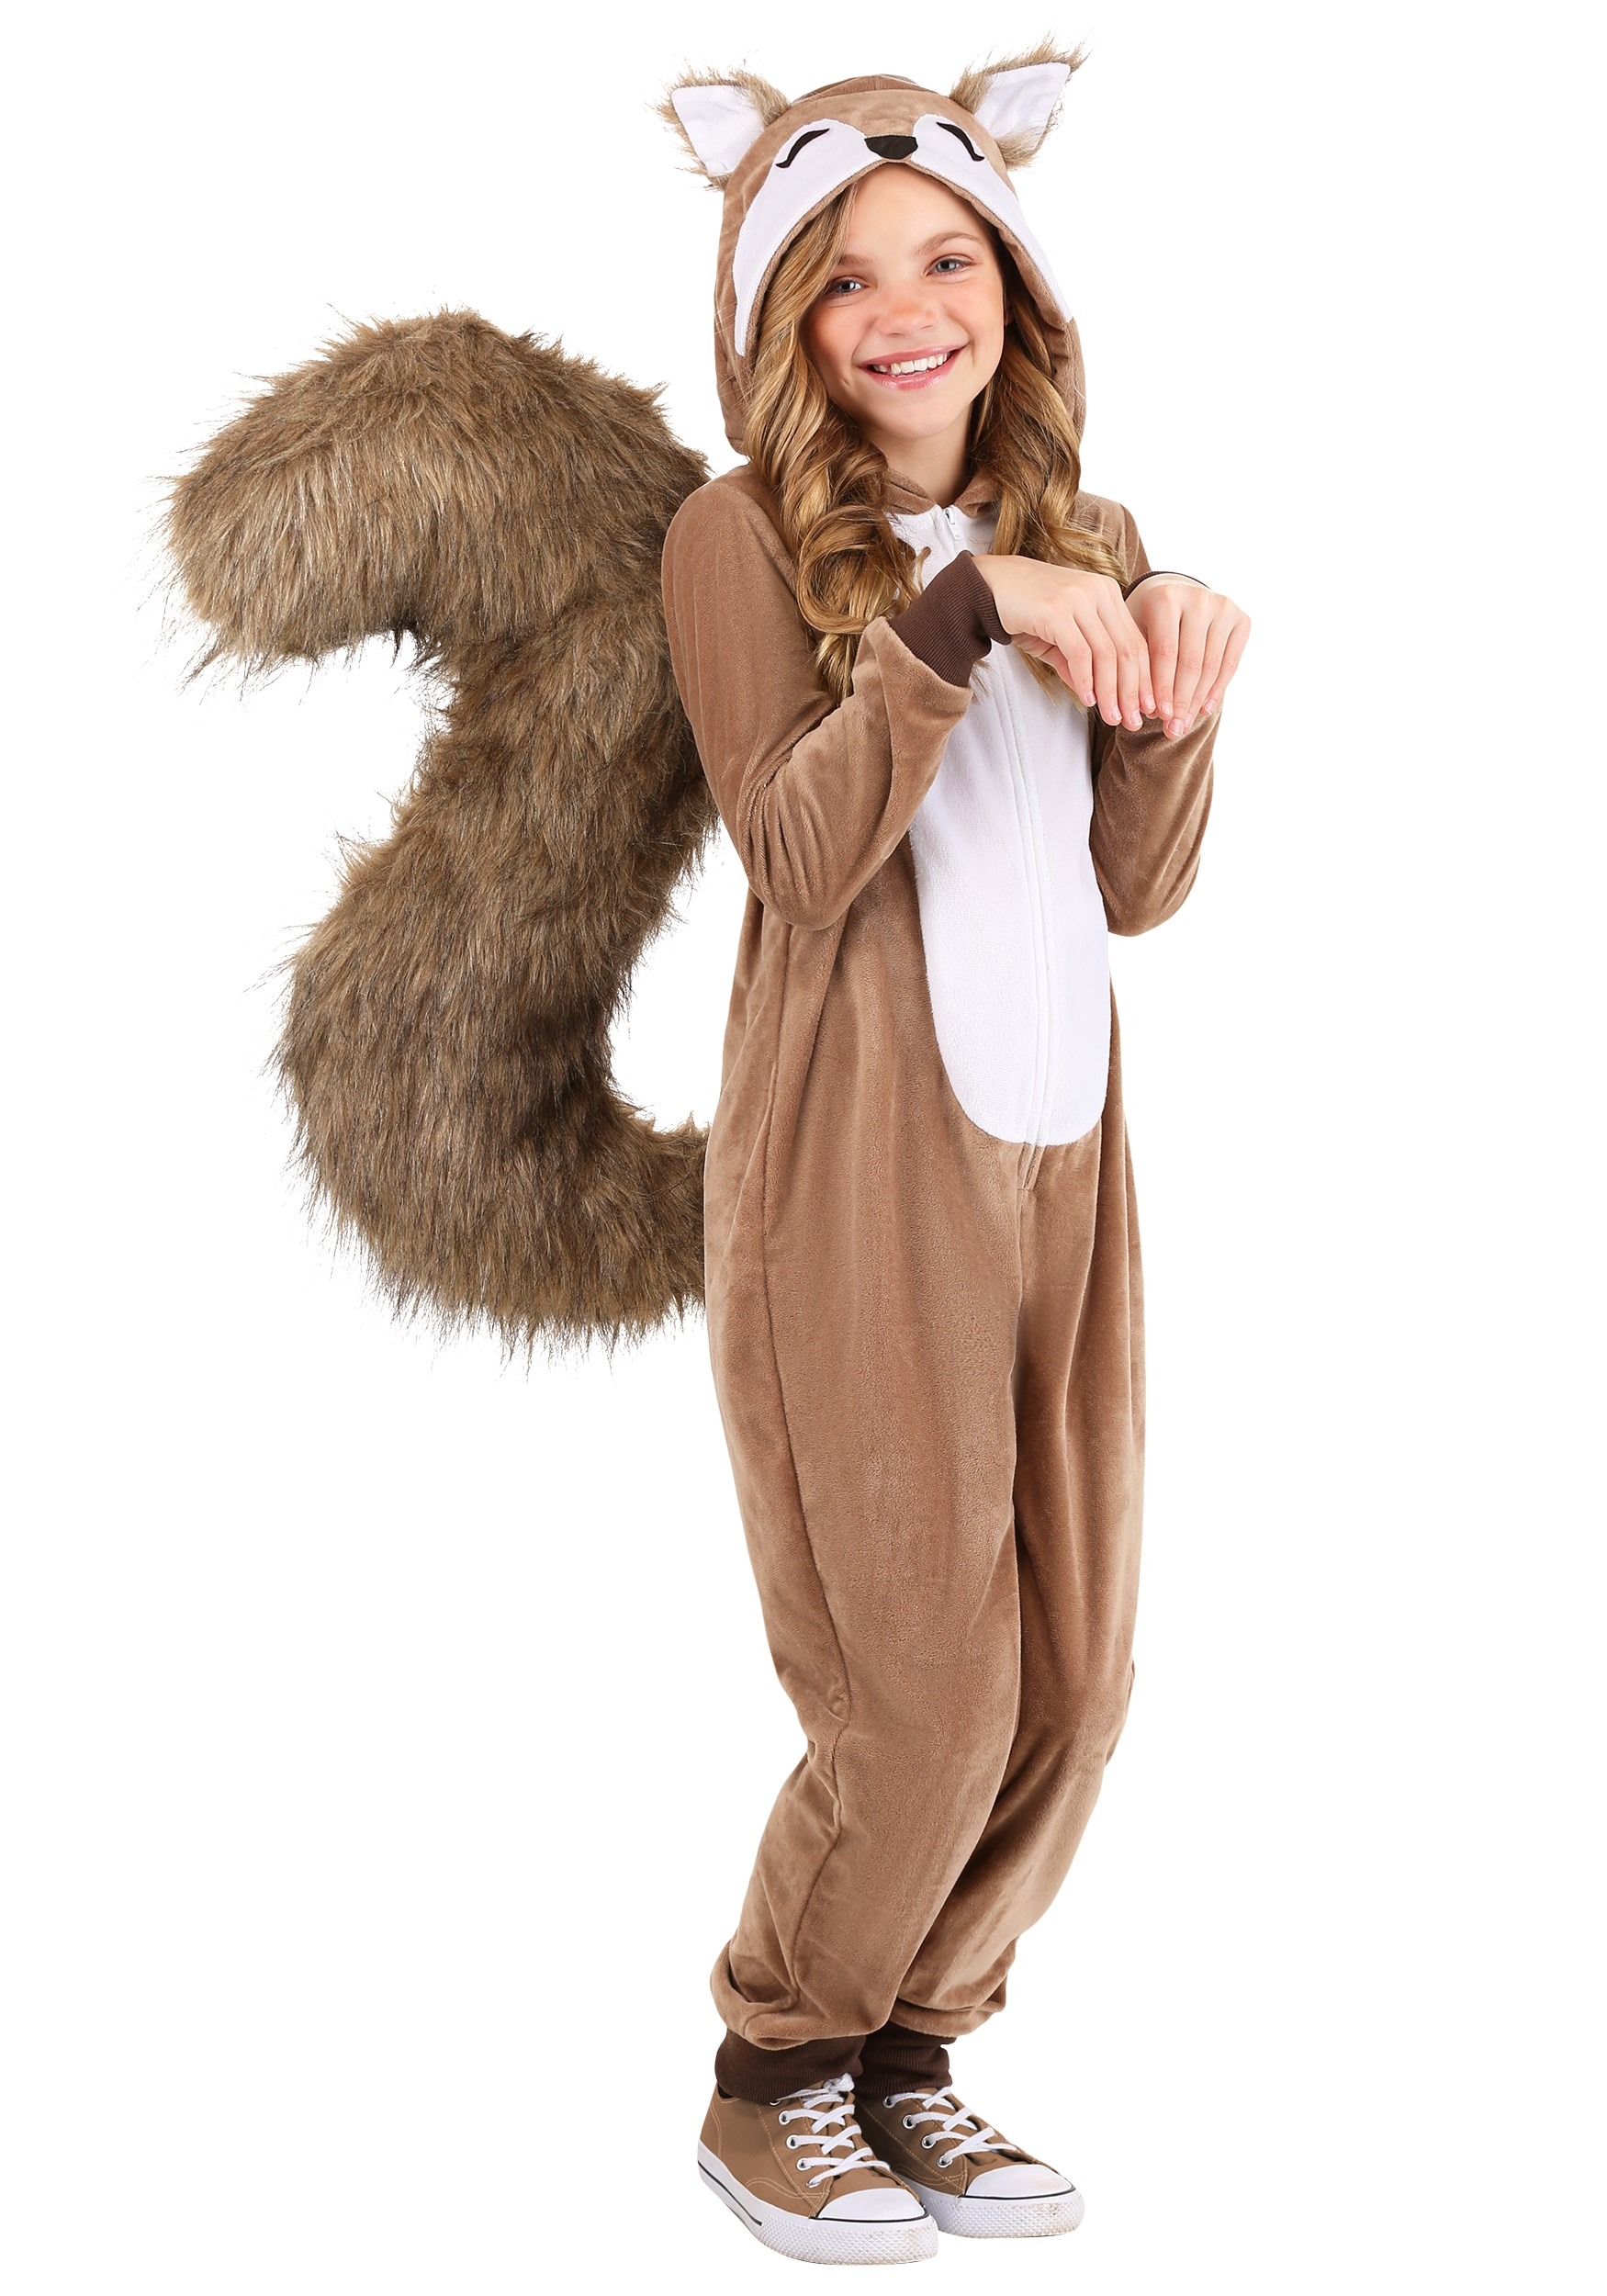 Photos - Fancy Dress FUN Costumes Scampering Squirrel Kid's Costume Brown/White